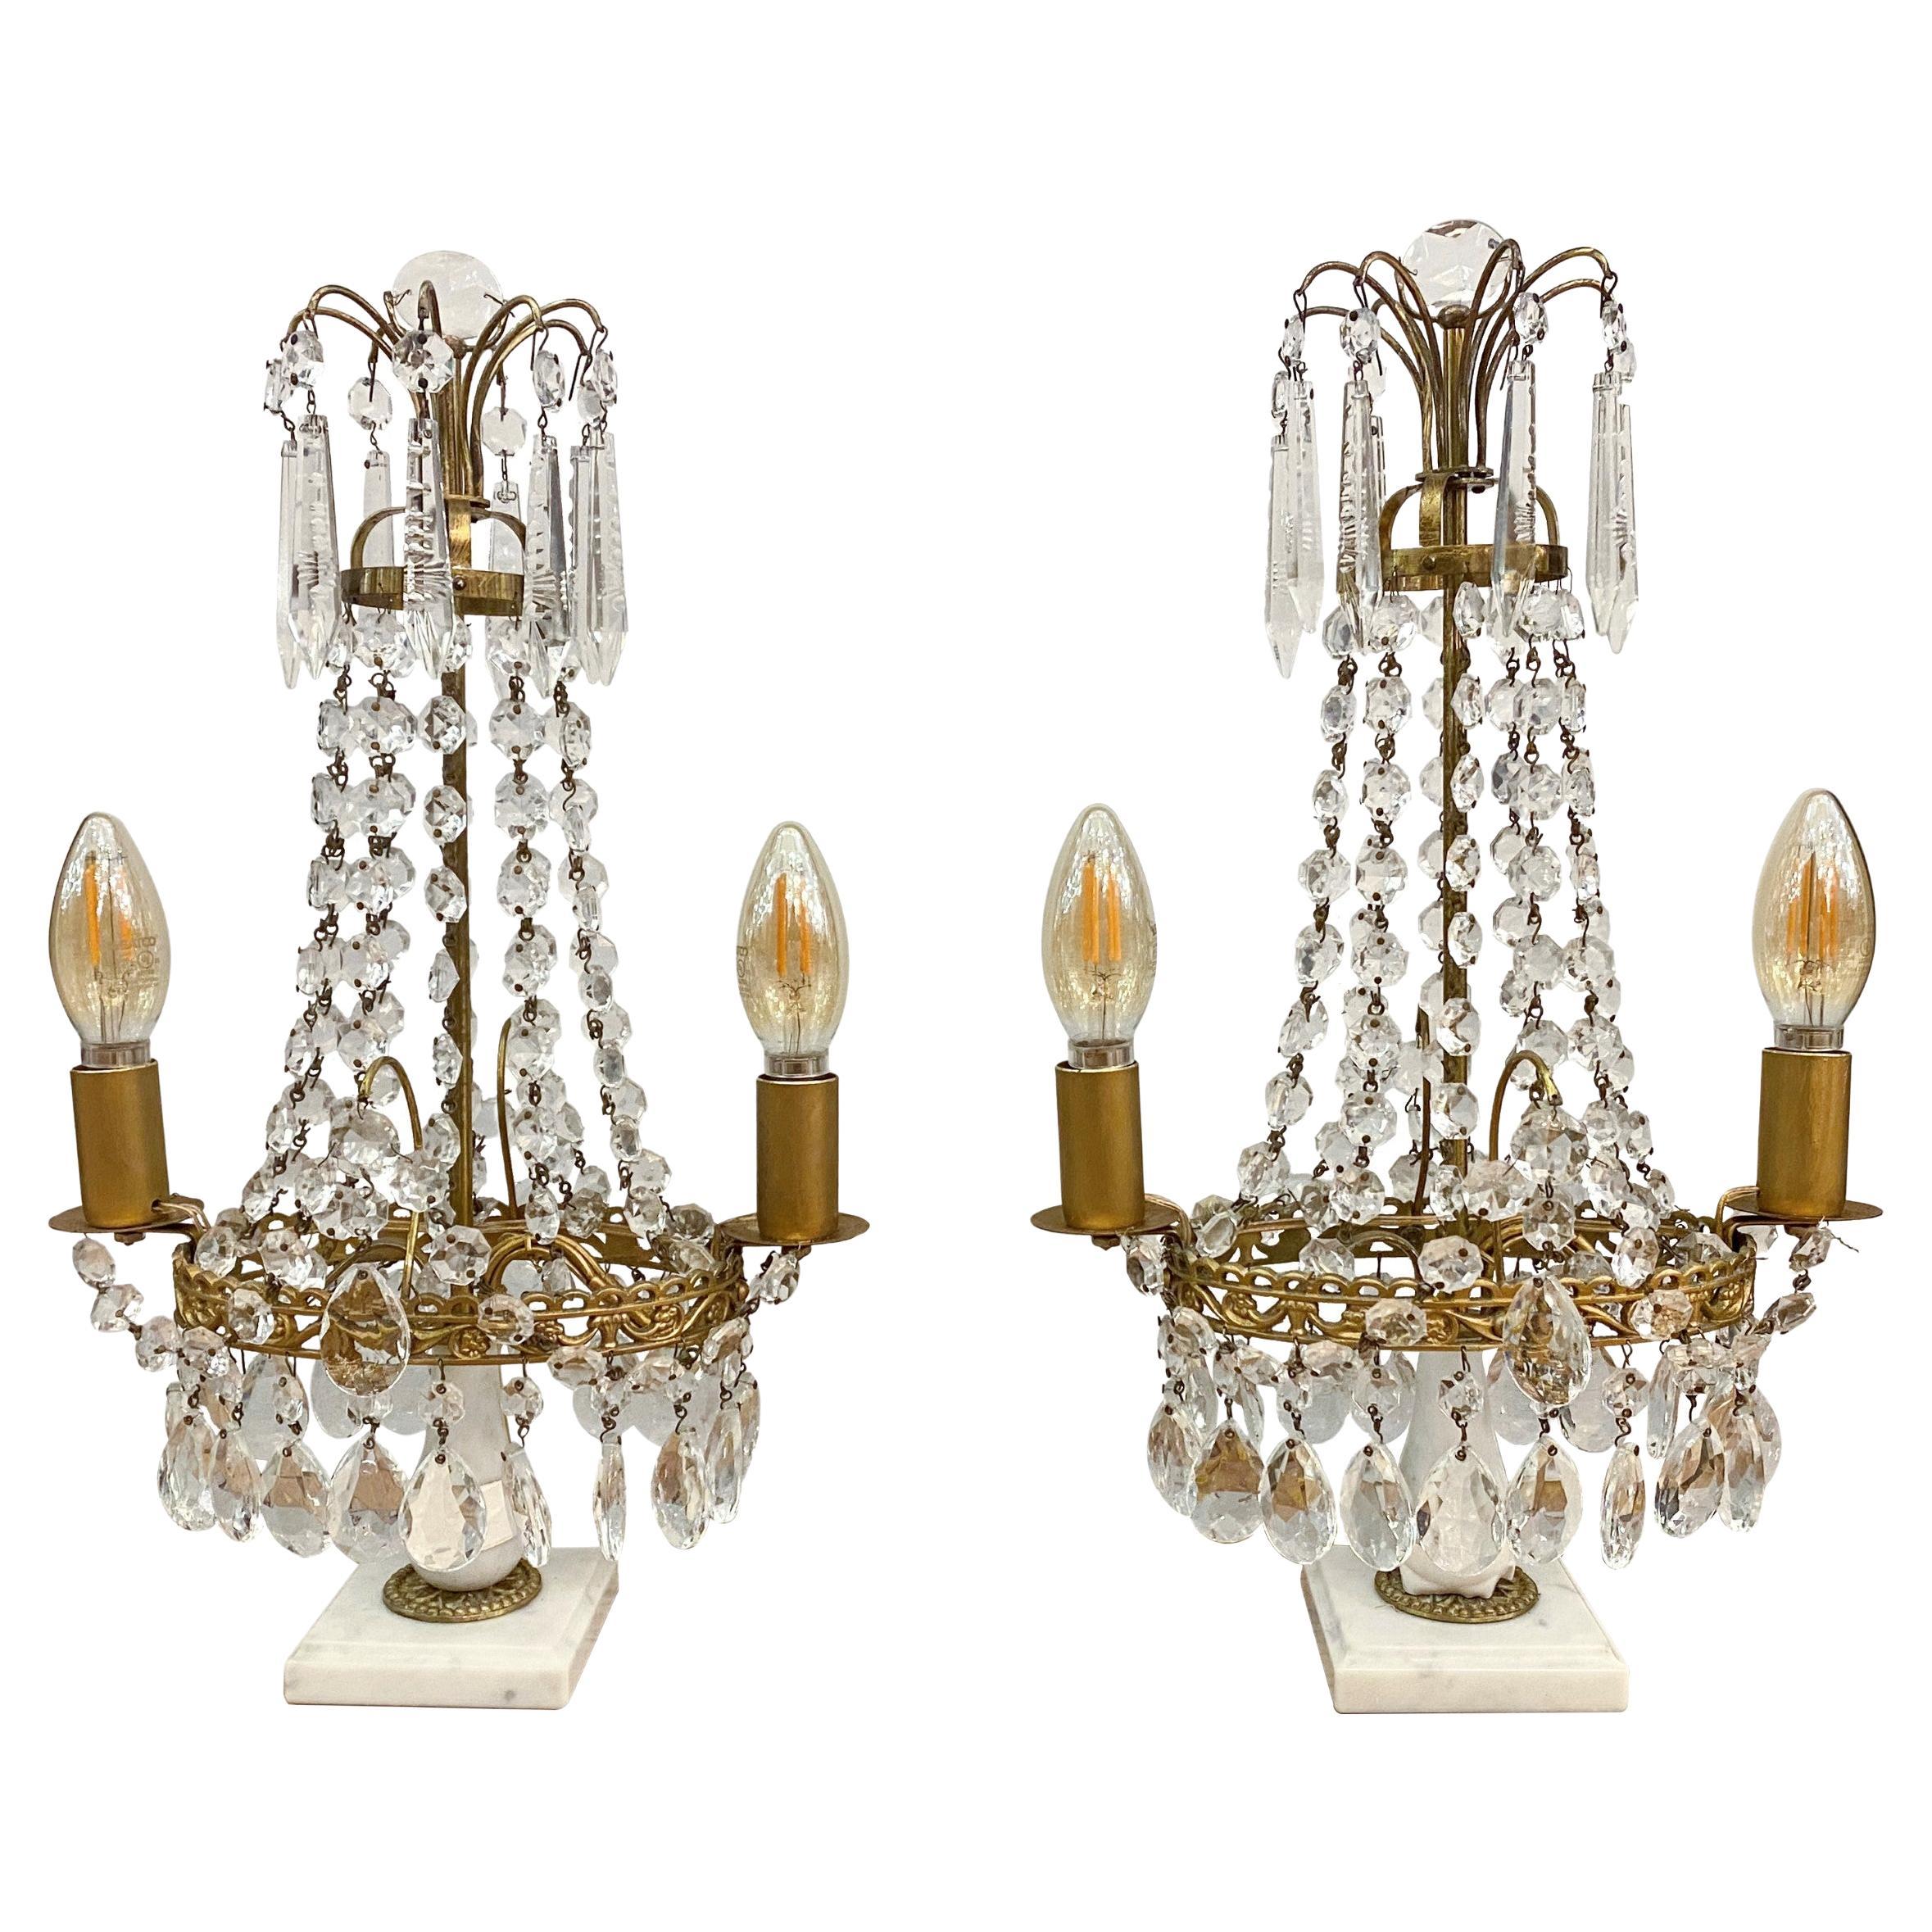 1890s Pair Gustavian Style Electrified Crystal Table Lamps